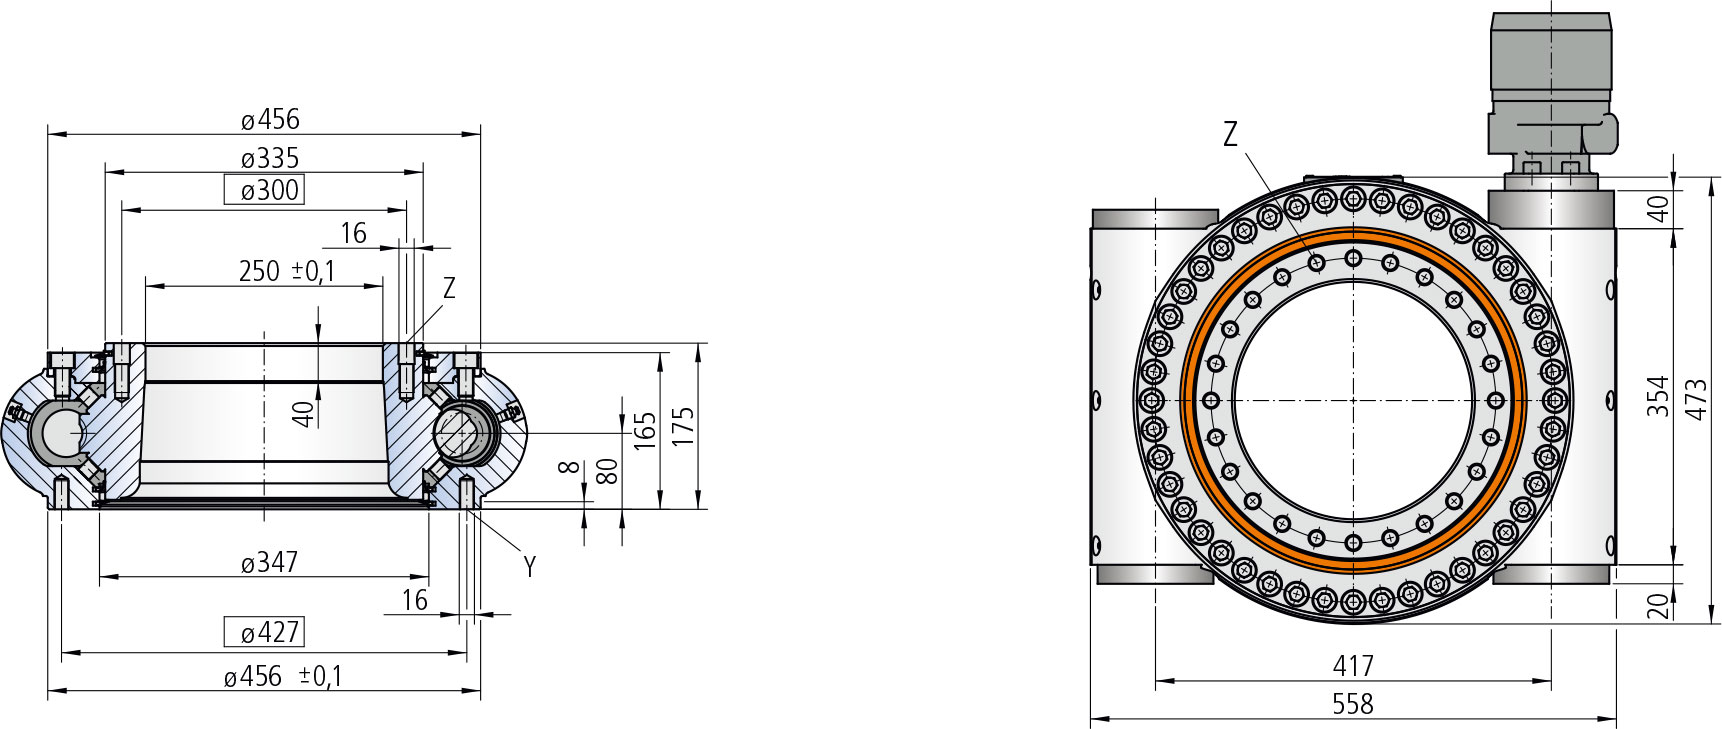 WD-H 0300 / 1 drive WD-H Series cad drawing